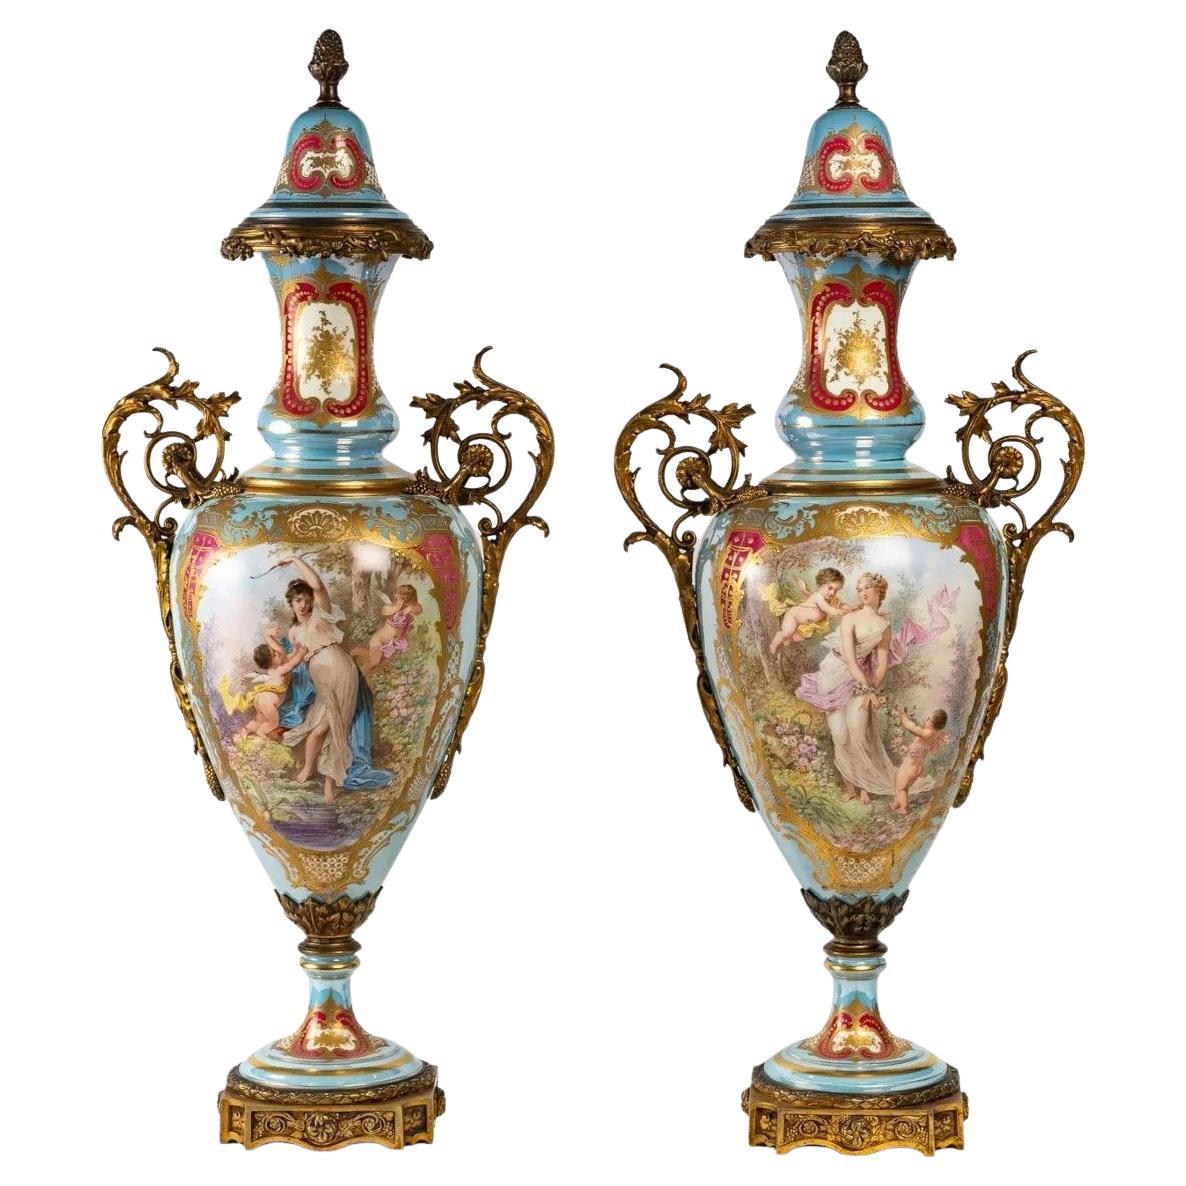 Very Important Pair of bright turquoise Sèvres Porcelain Vases, signed Sèvres